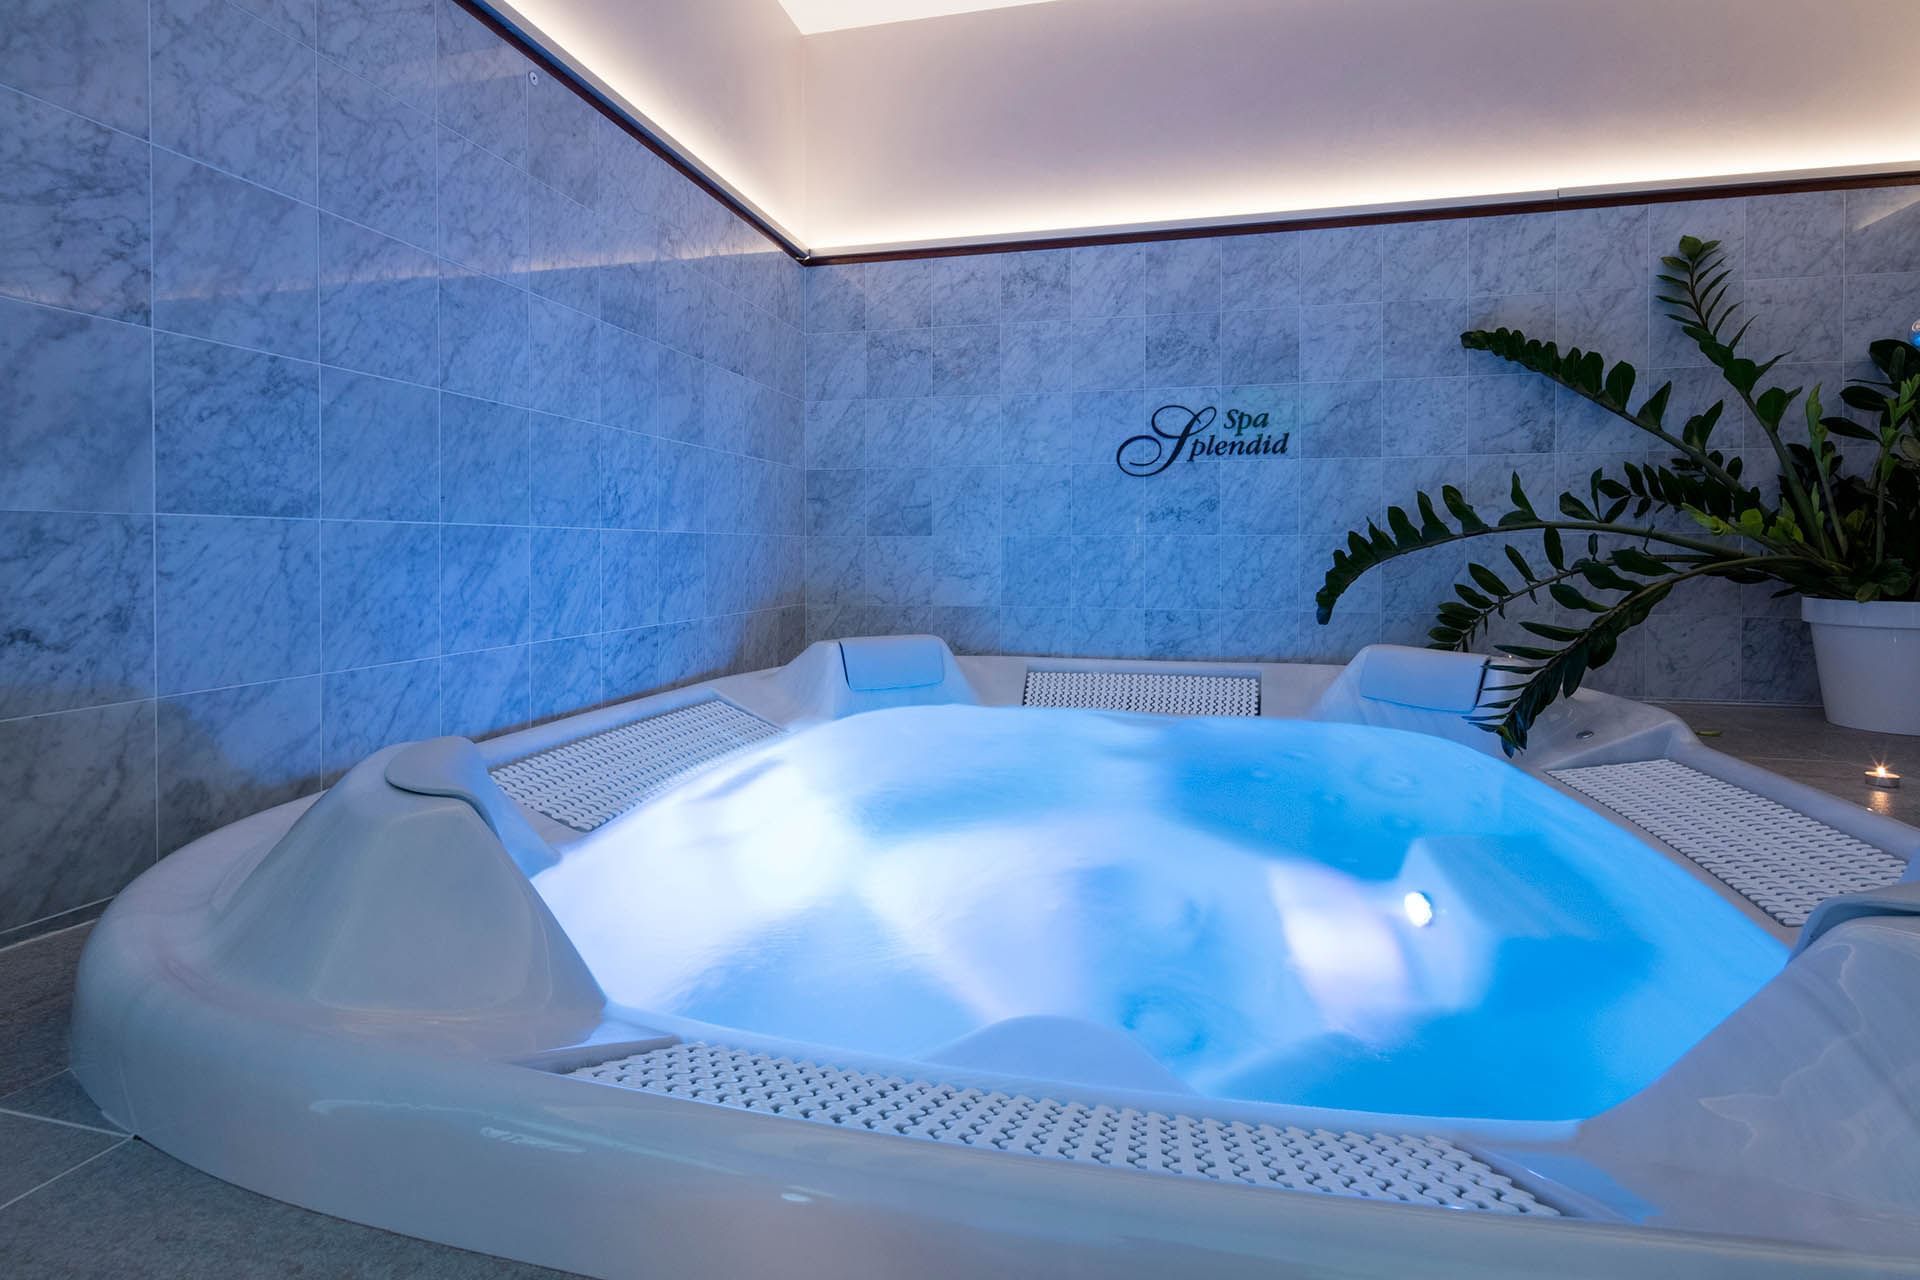 Jacuzzi Spa at Splendid Hotel and Spa